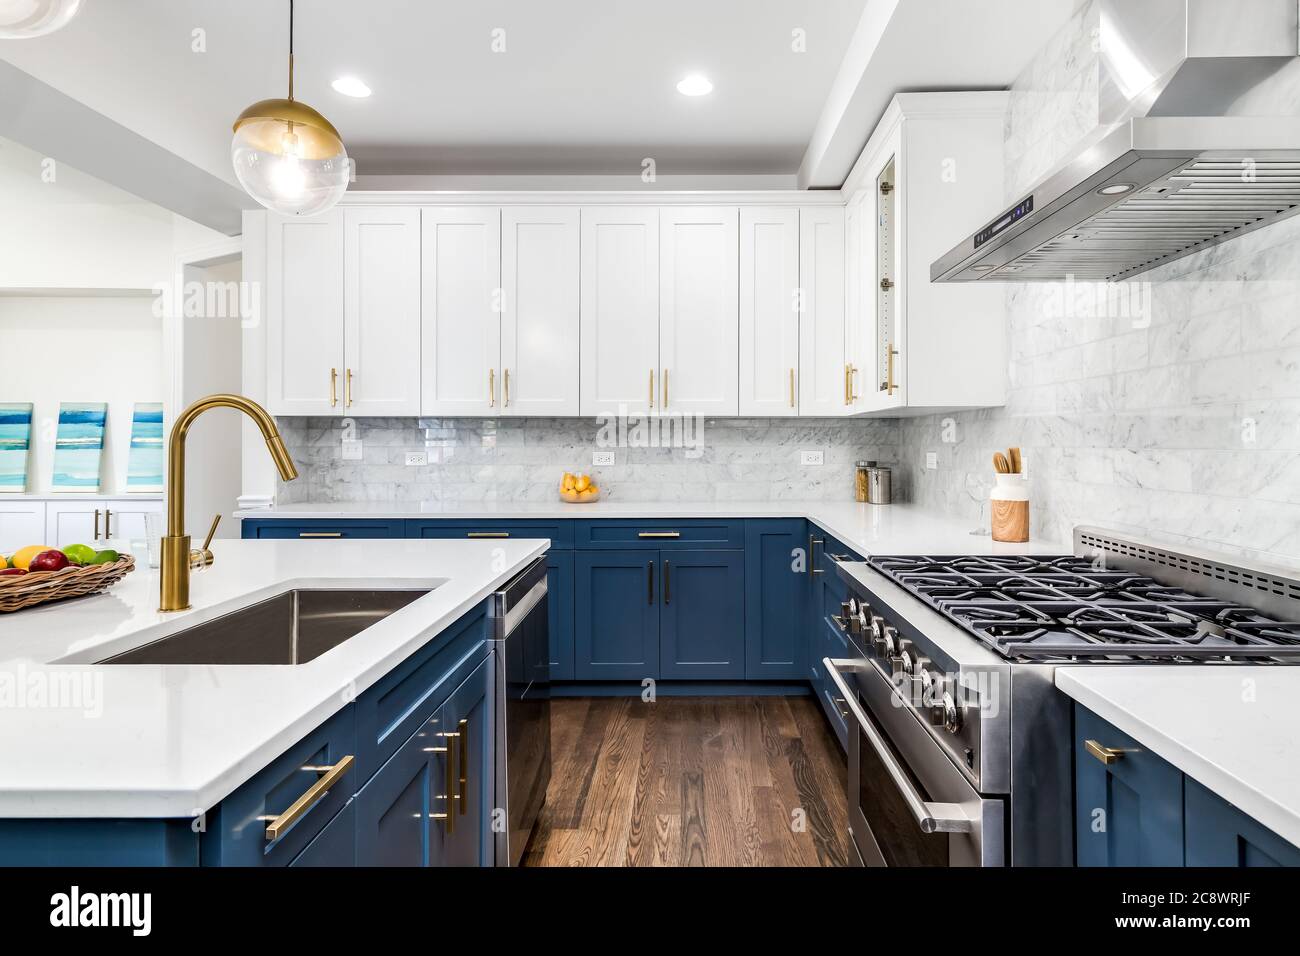 A Luxurious White And Blue Kitchen With Gold Hardware Bosch And Samsung Stainless Steel Appliances And White Marbled Granite Counter Tops Stock Photo Alamy